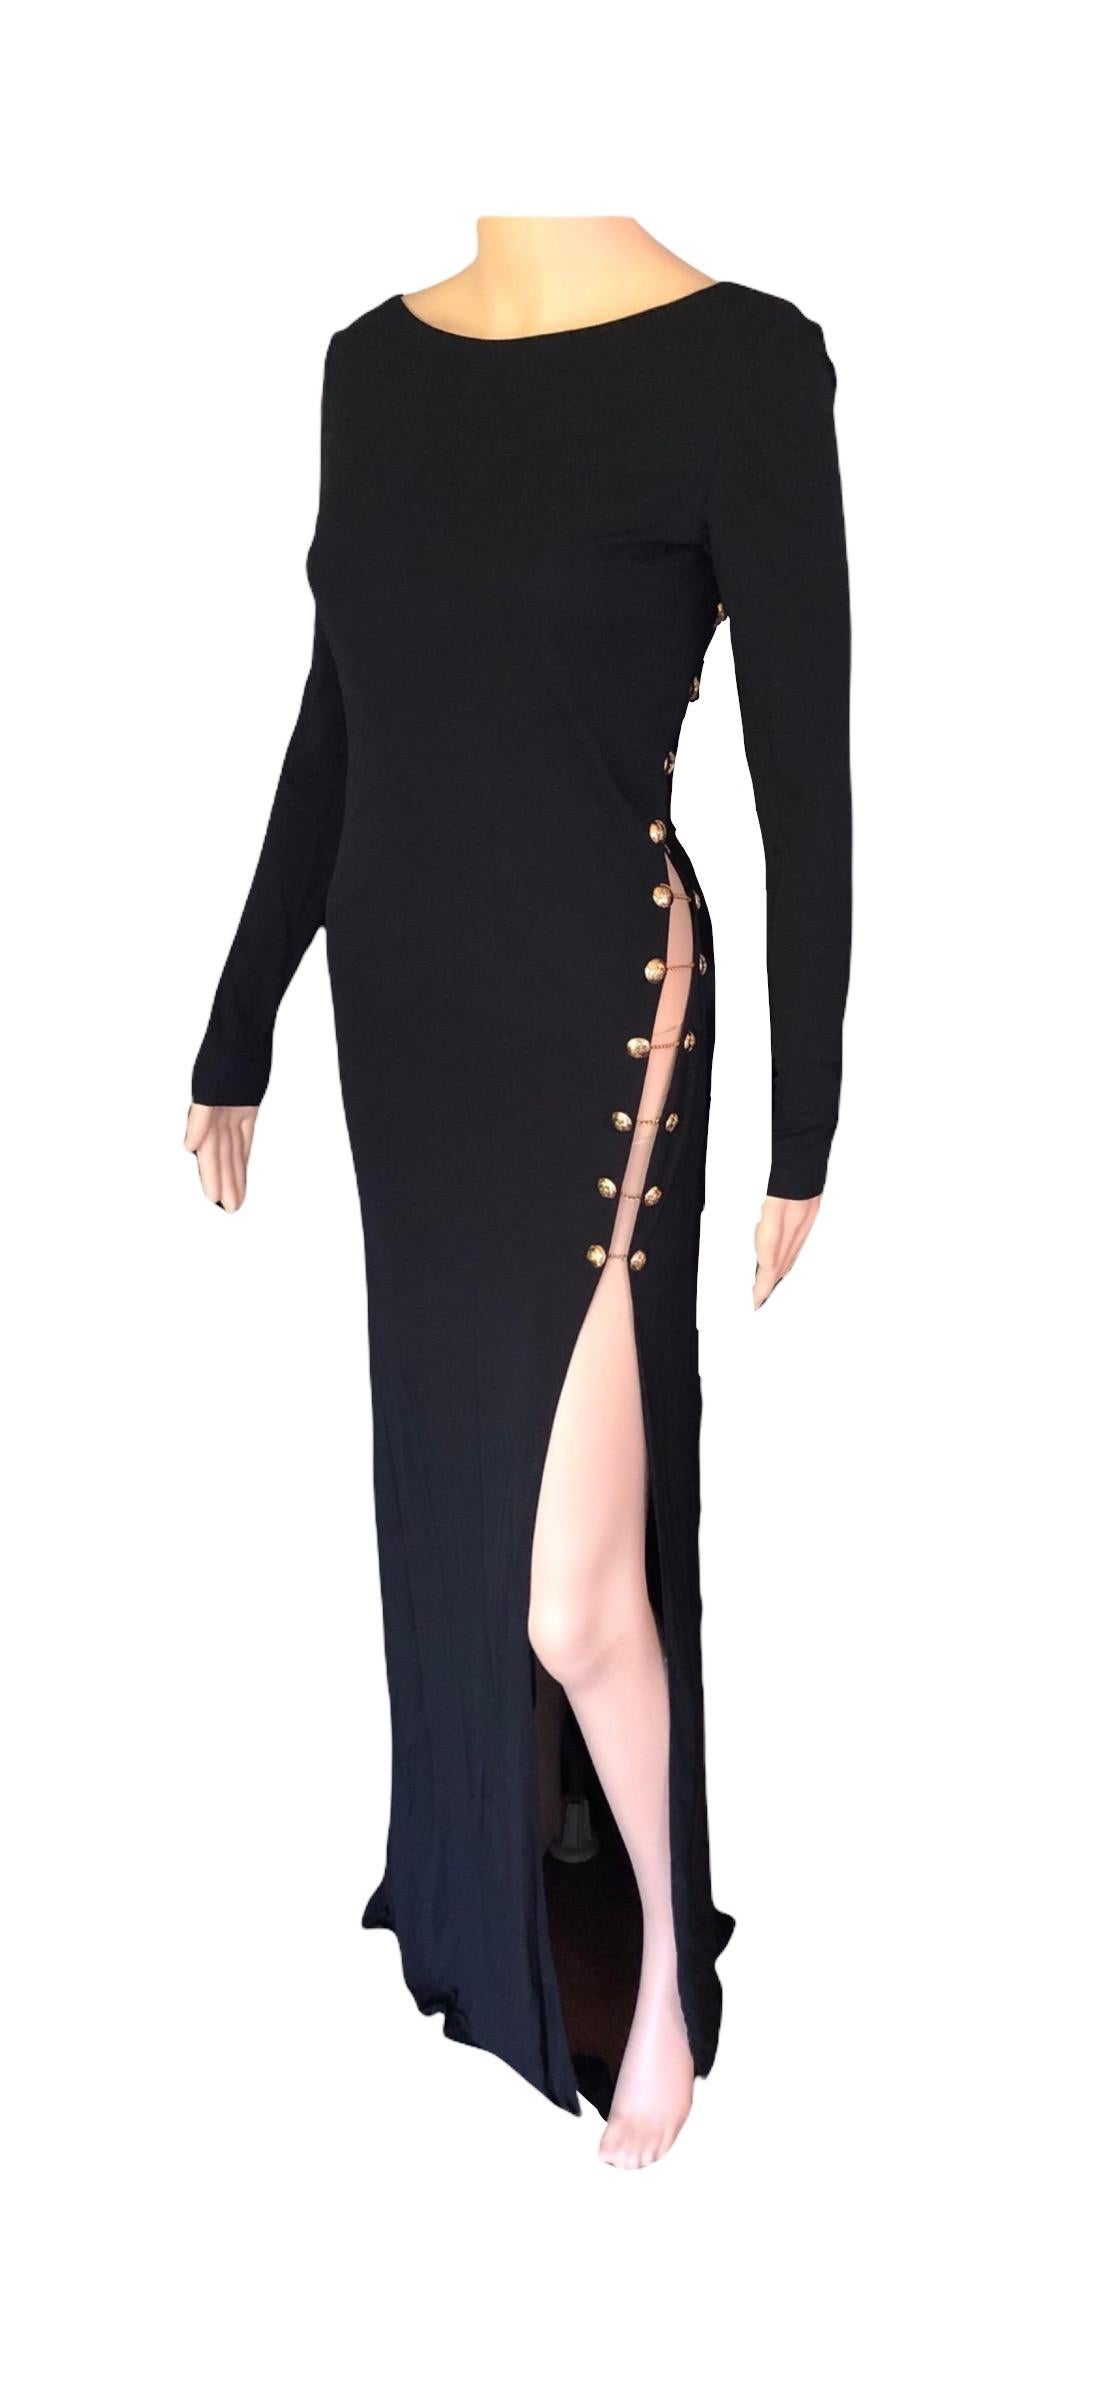 Emilio Pucci Chain Embellished Cutout Open Back Black Evening Dress Gown For Sale 4